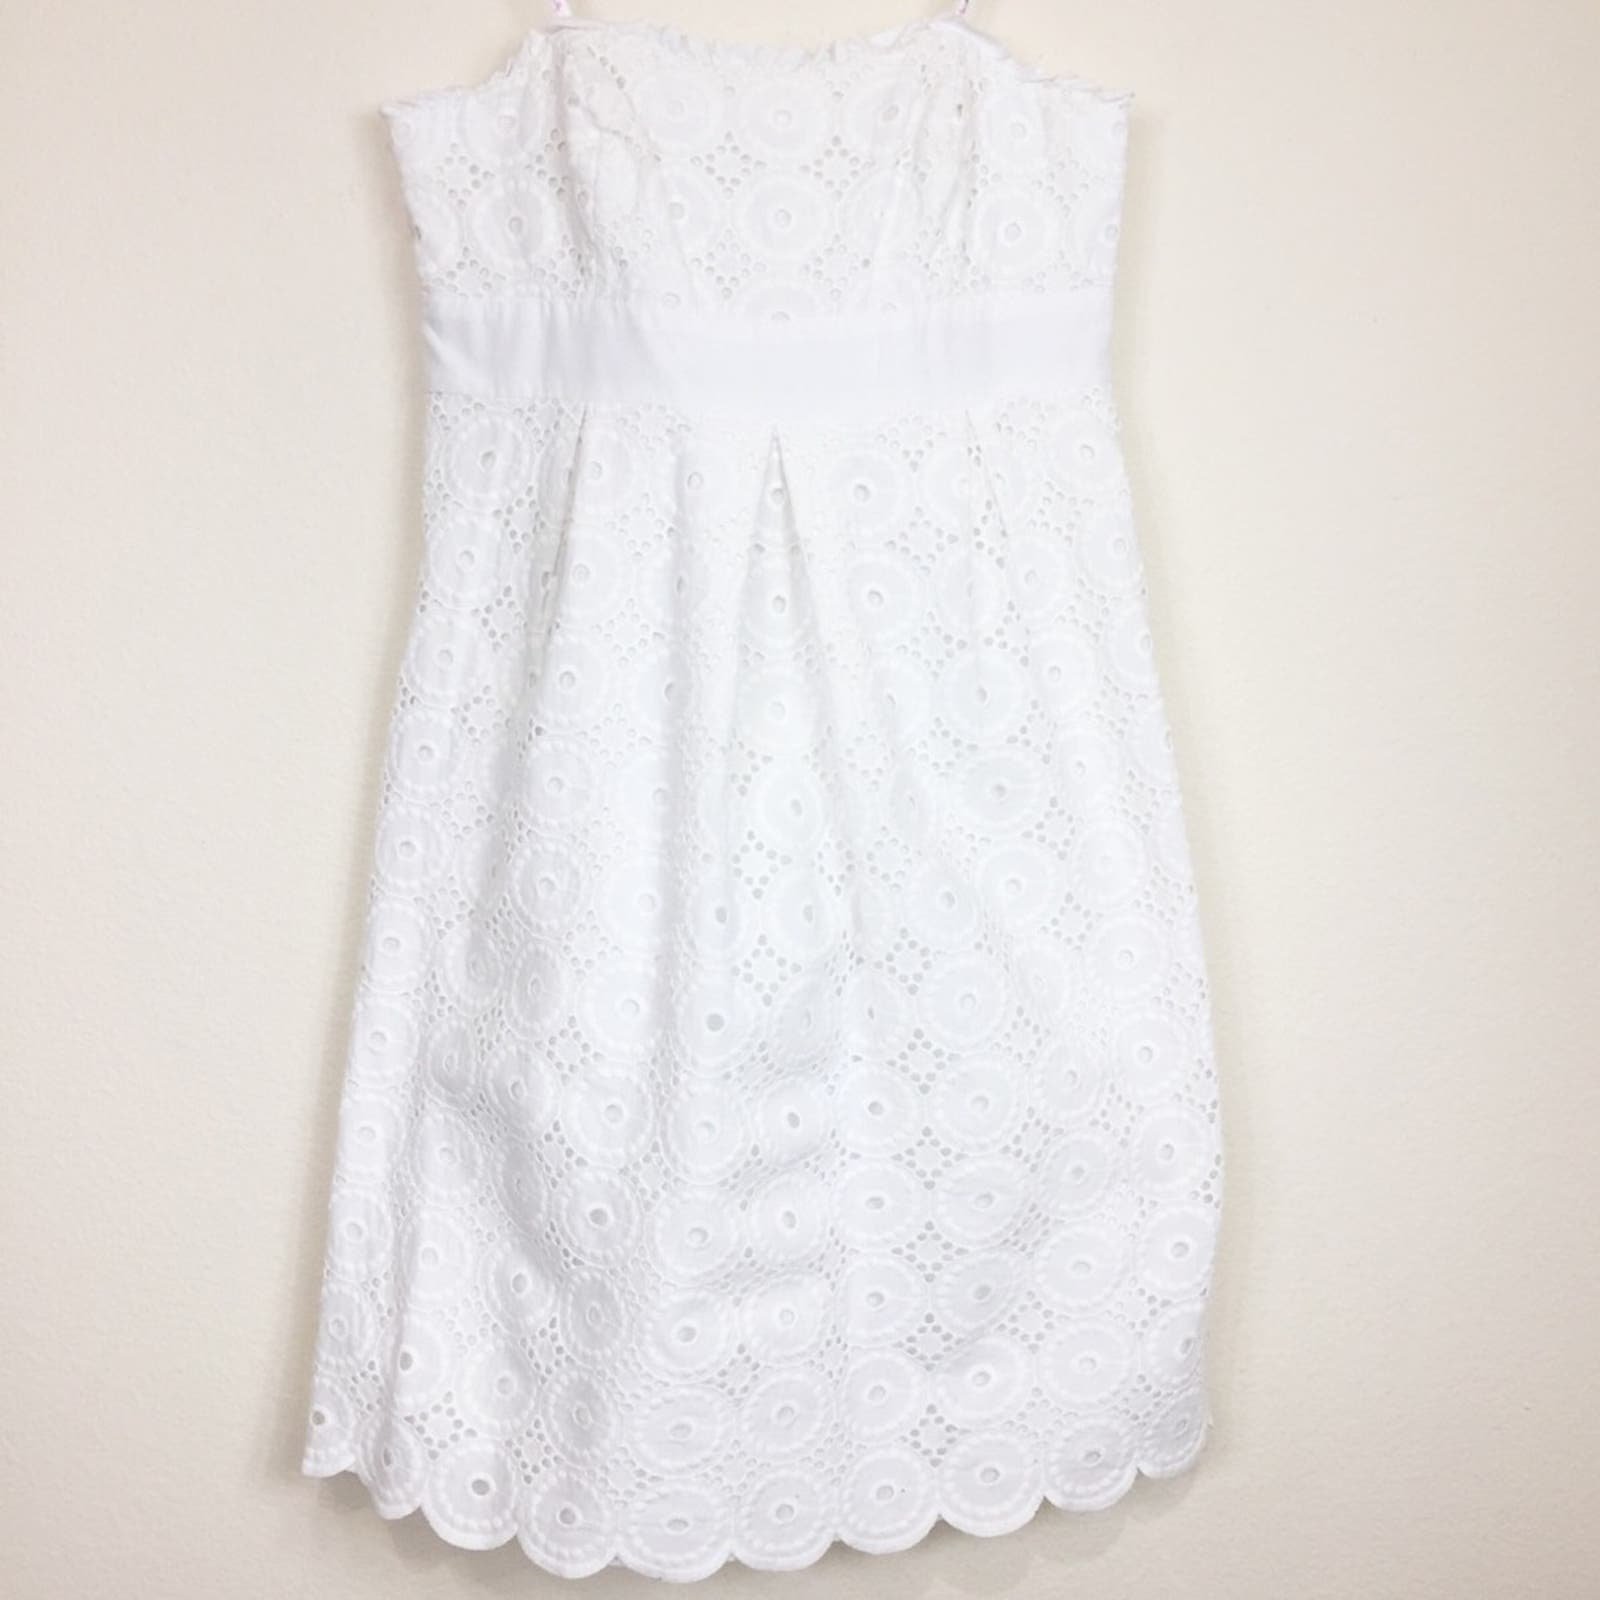 Great Lilly Pulitzer Strapless Eyelet Dress K605dP4bS w